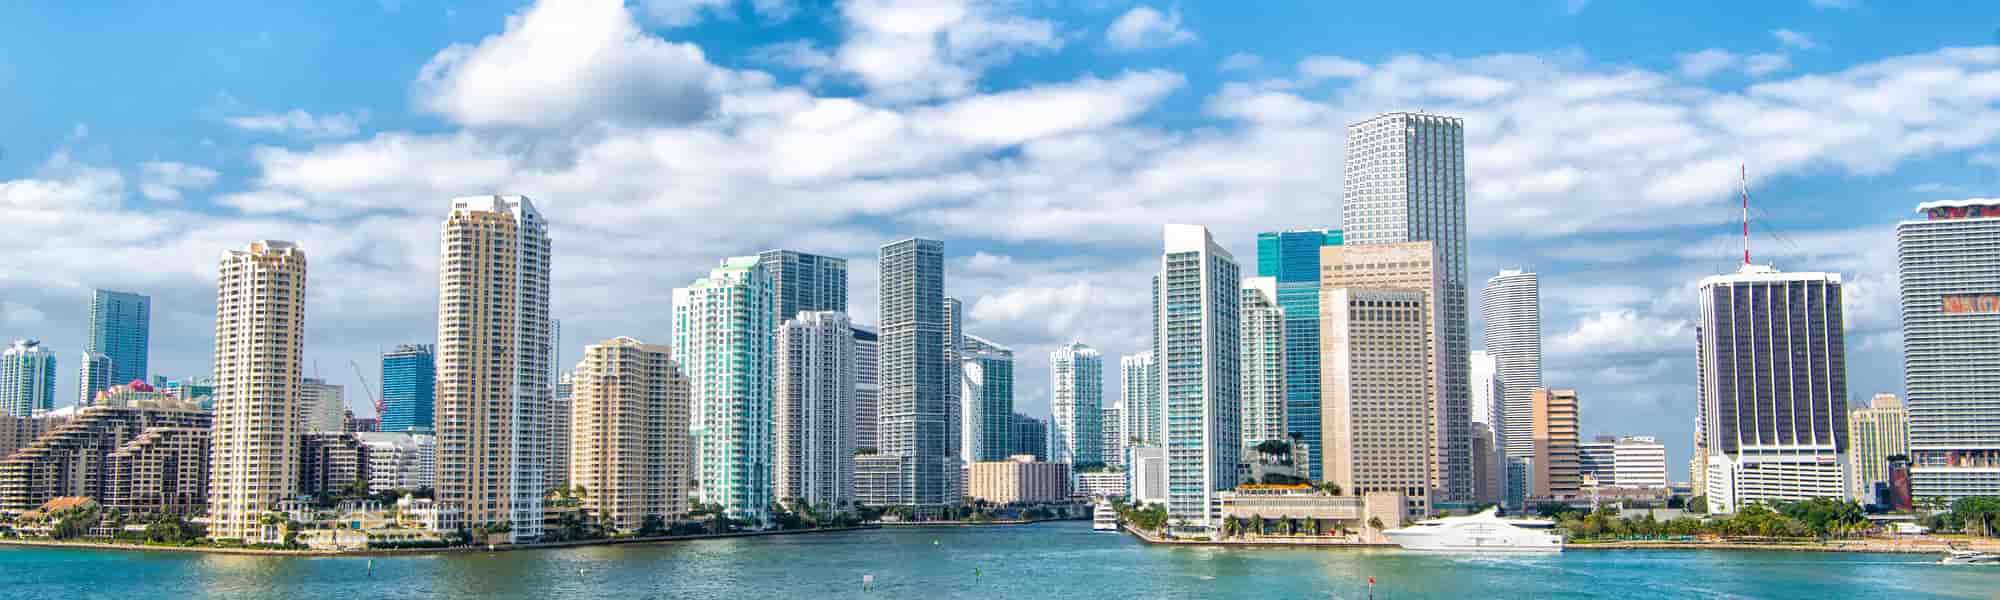 Miami Housing Market Prices, Trends & Forecasts 20222023